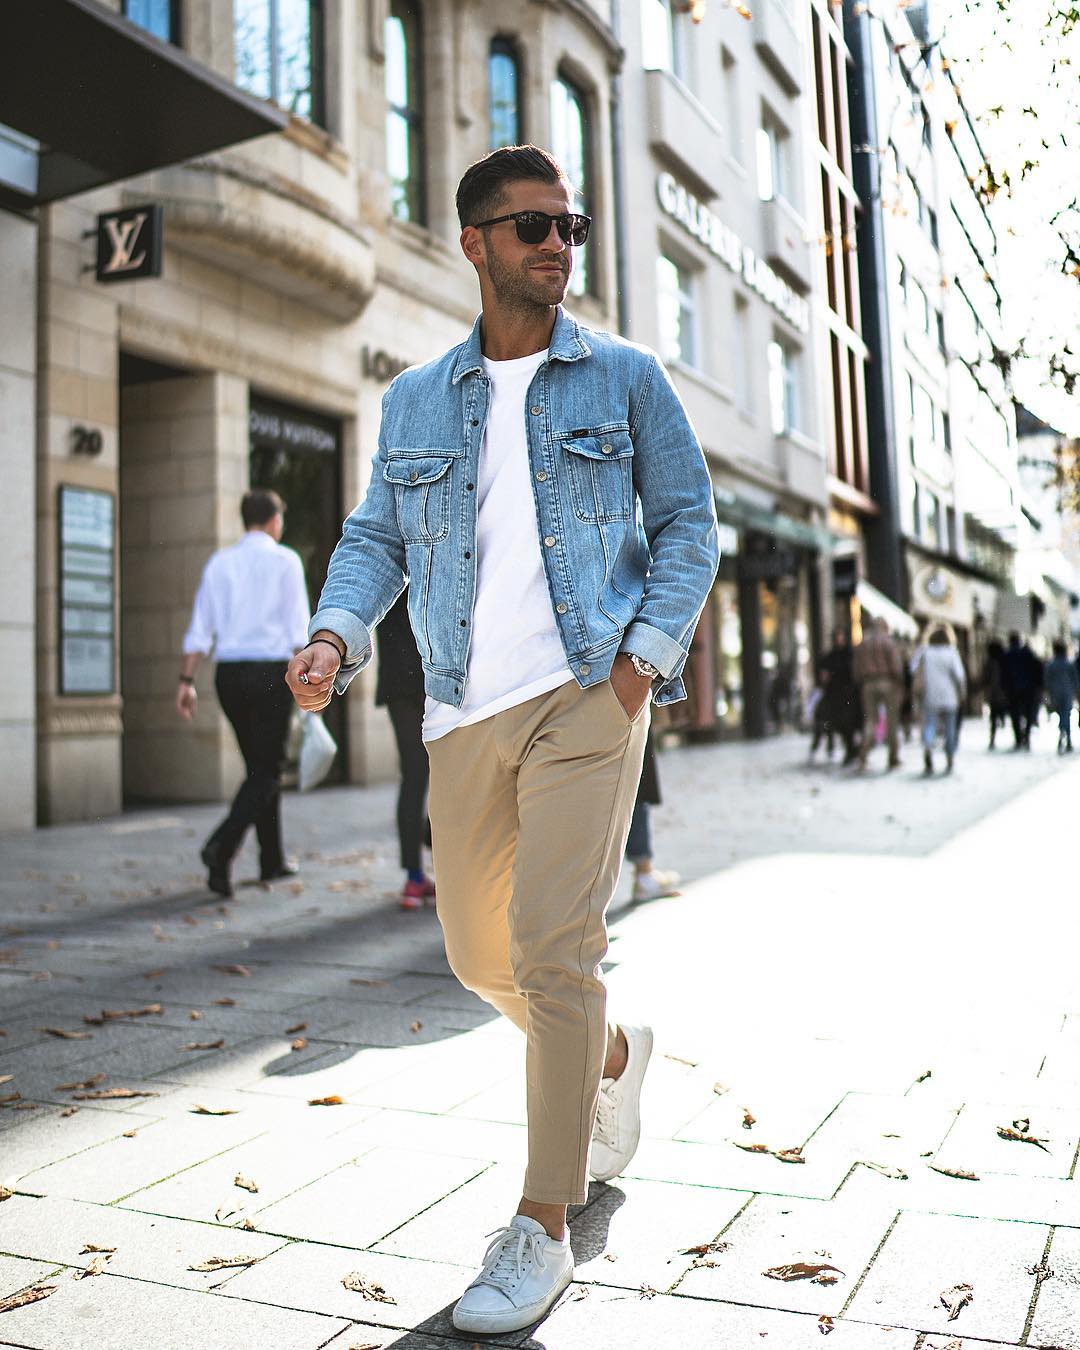 5 Denim Jacket Outfits For Men – LIFESTYLE BY PS